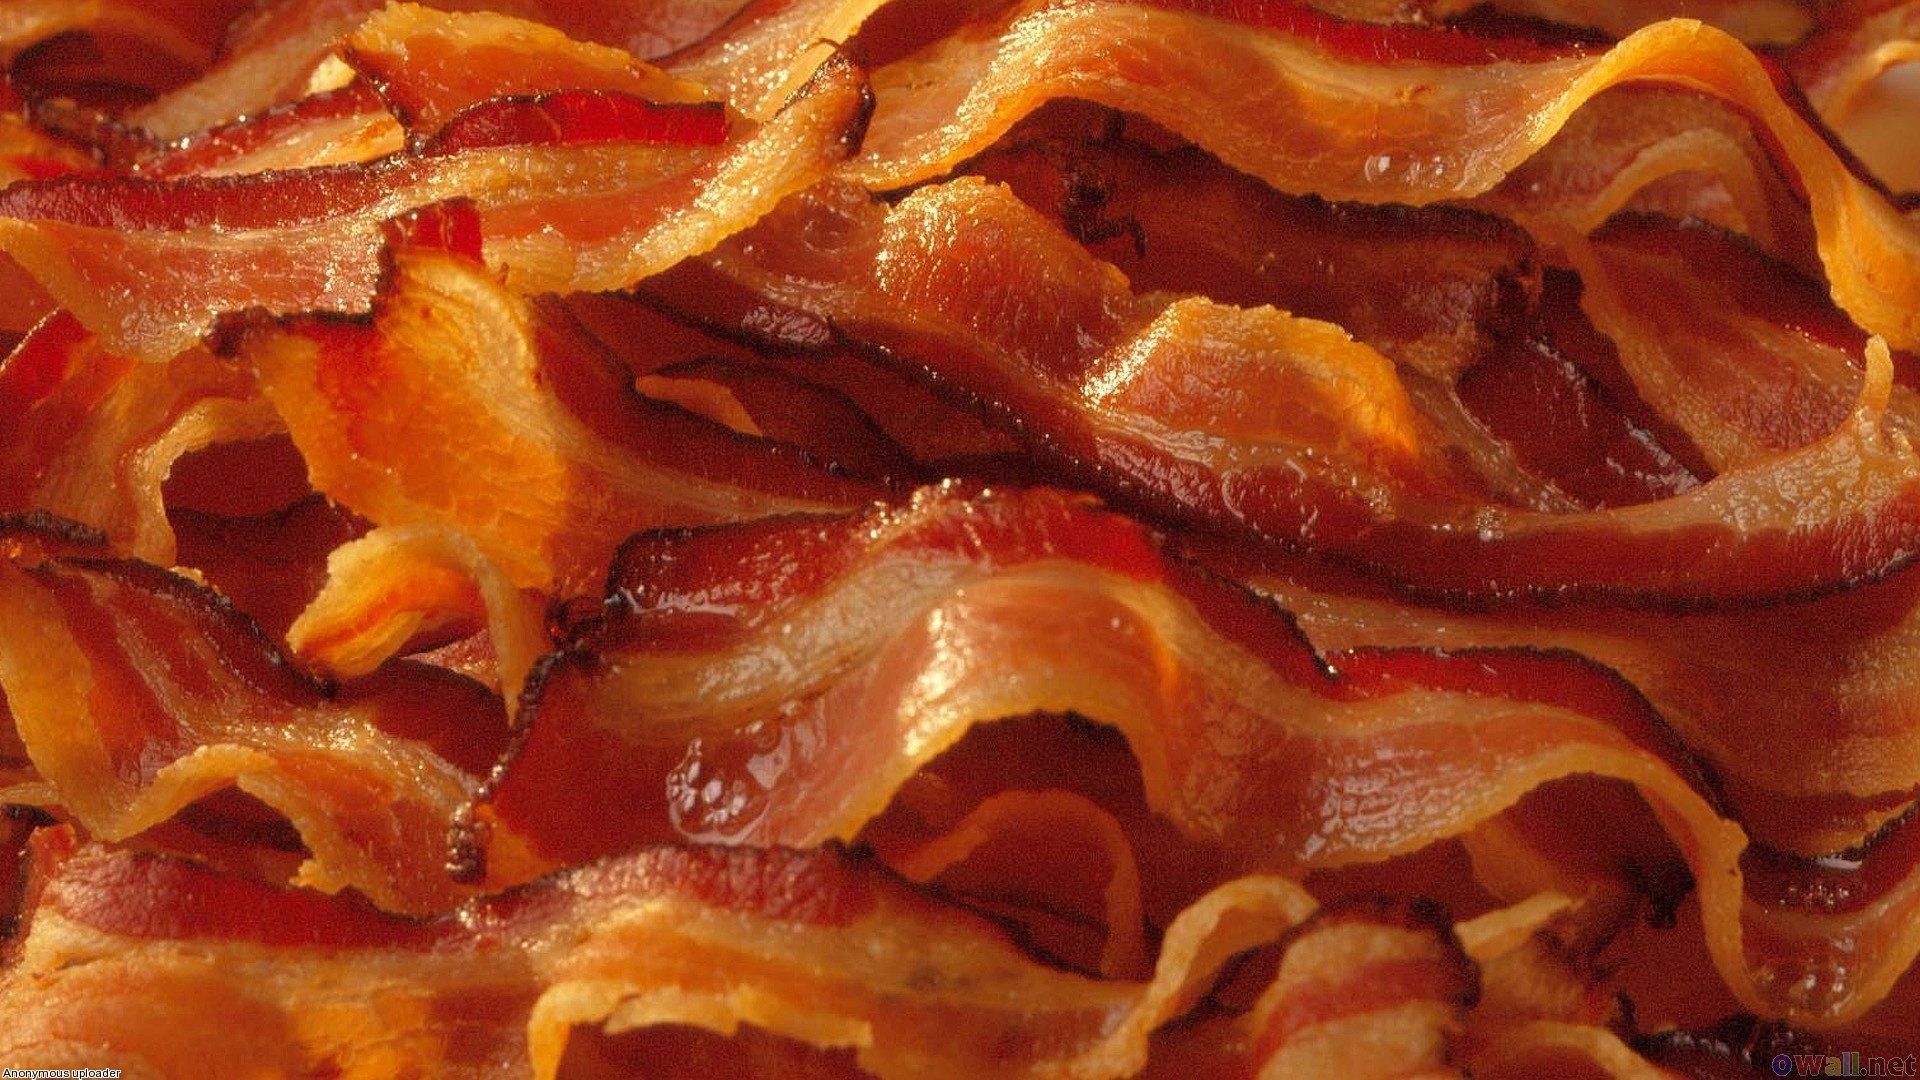 Bacon Wallpaper Stock Photos and Images - 123RF